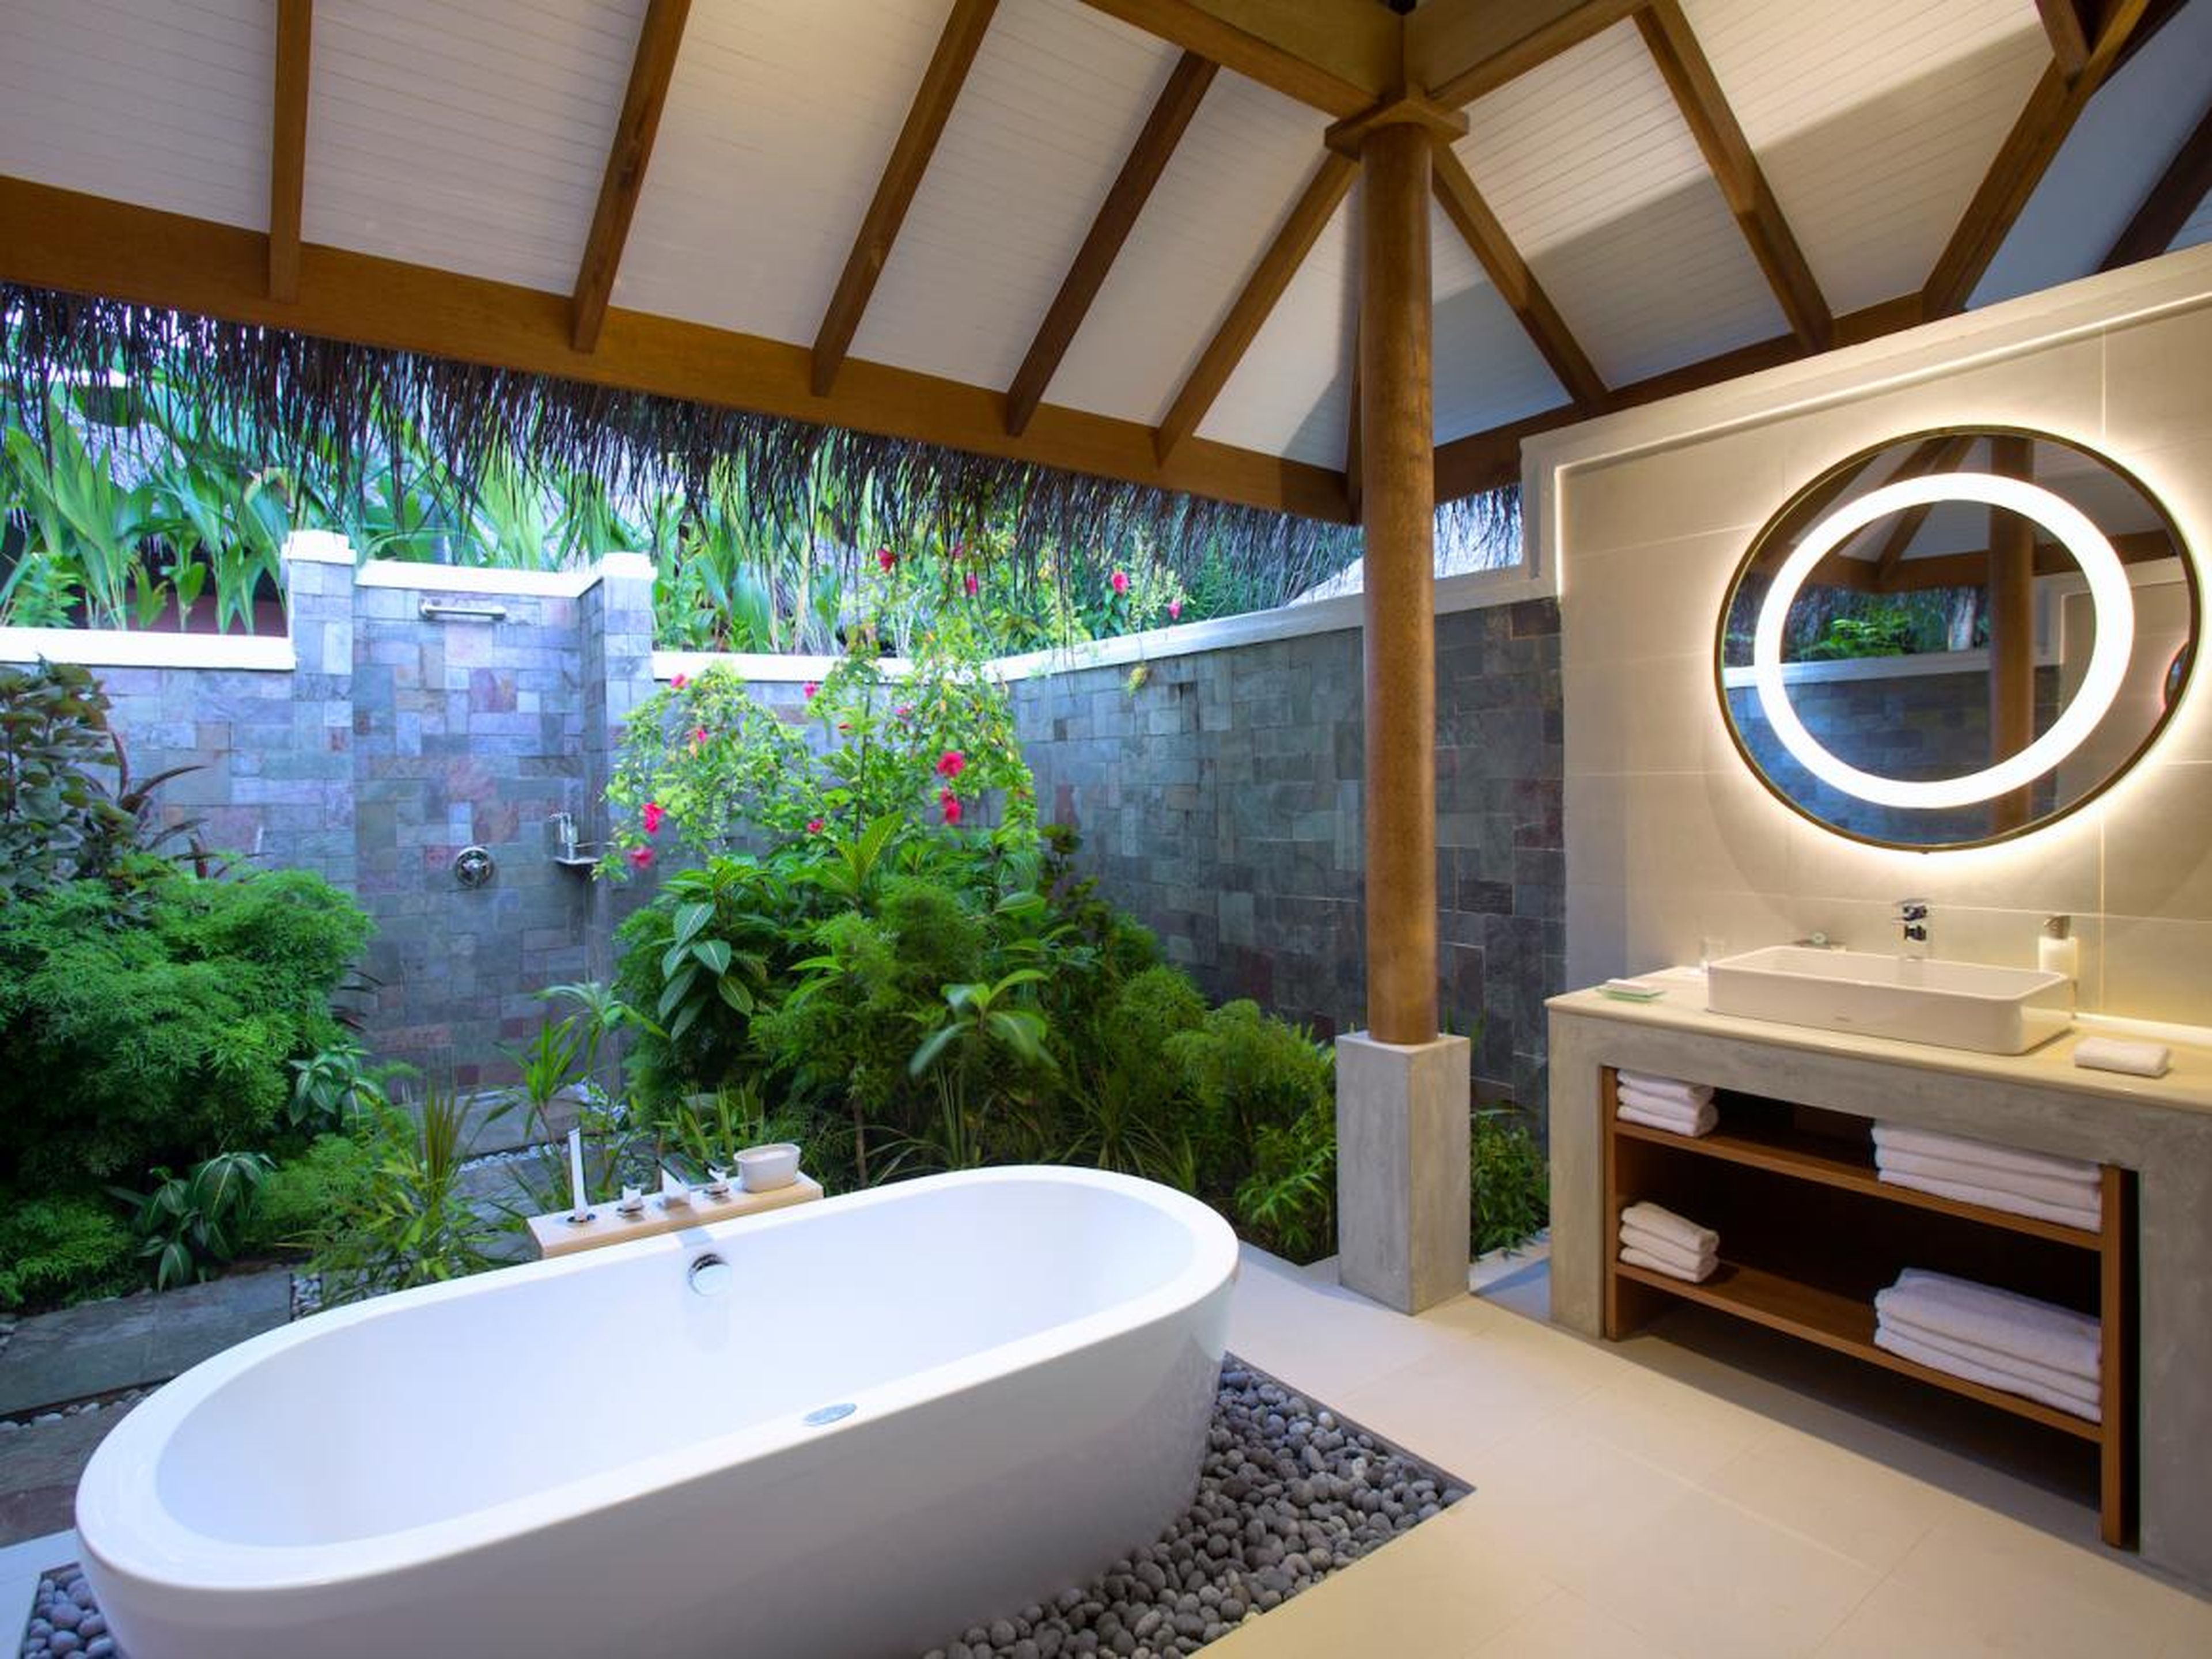 ... and open-air bathrooms. Rates for Deluxe Villas start at about $863 per night for two people in the high season.